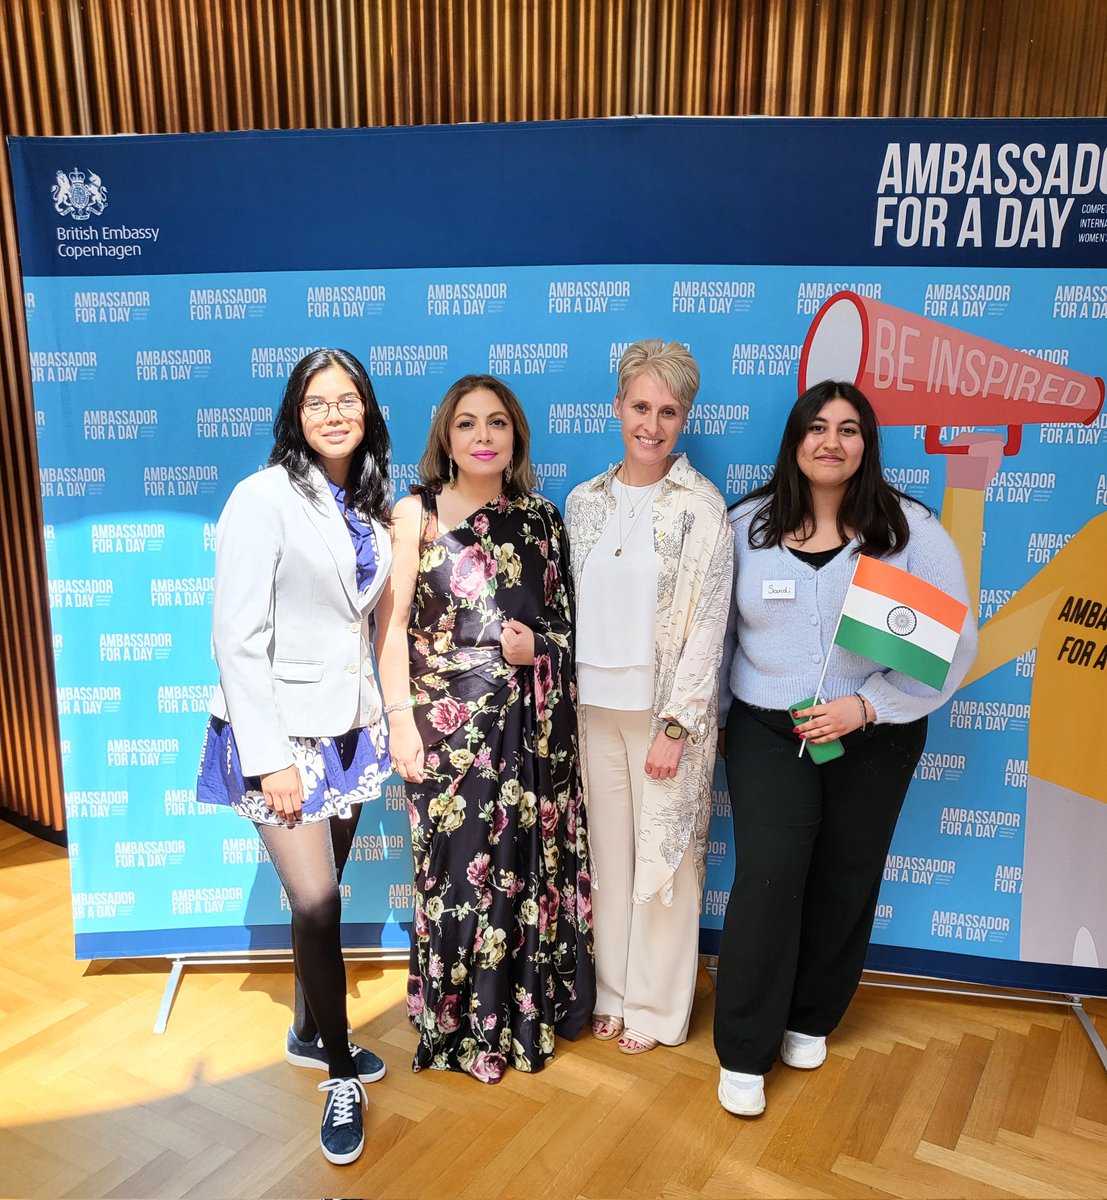 On #WomenInDiplomacy day, happy to be mentoring young girls along with the British Ambassador @EHopkinsFCDO and other lady Ambassadors in Copenhagen as part of the #AmbassadorForADay initiative..here's to a brighter future for all!